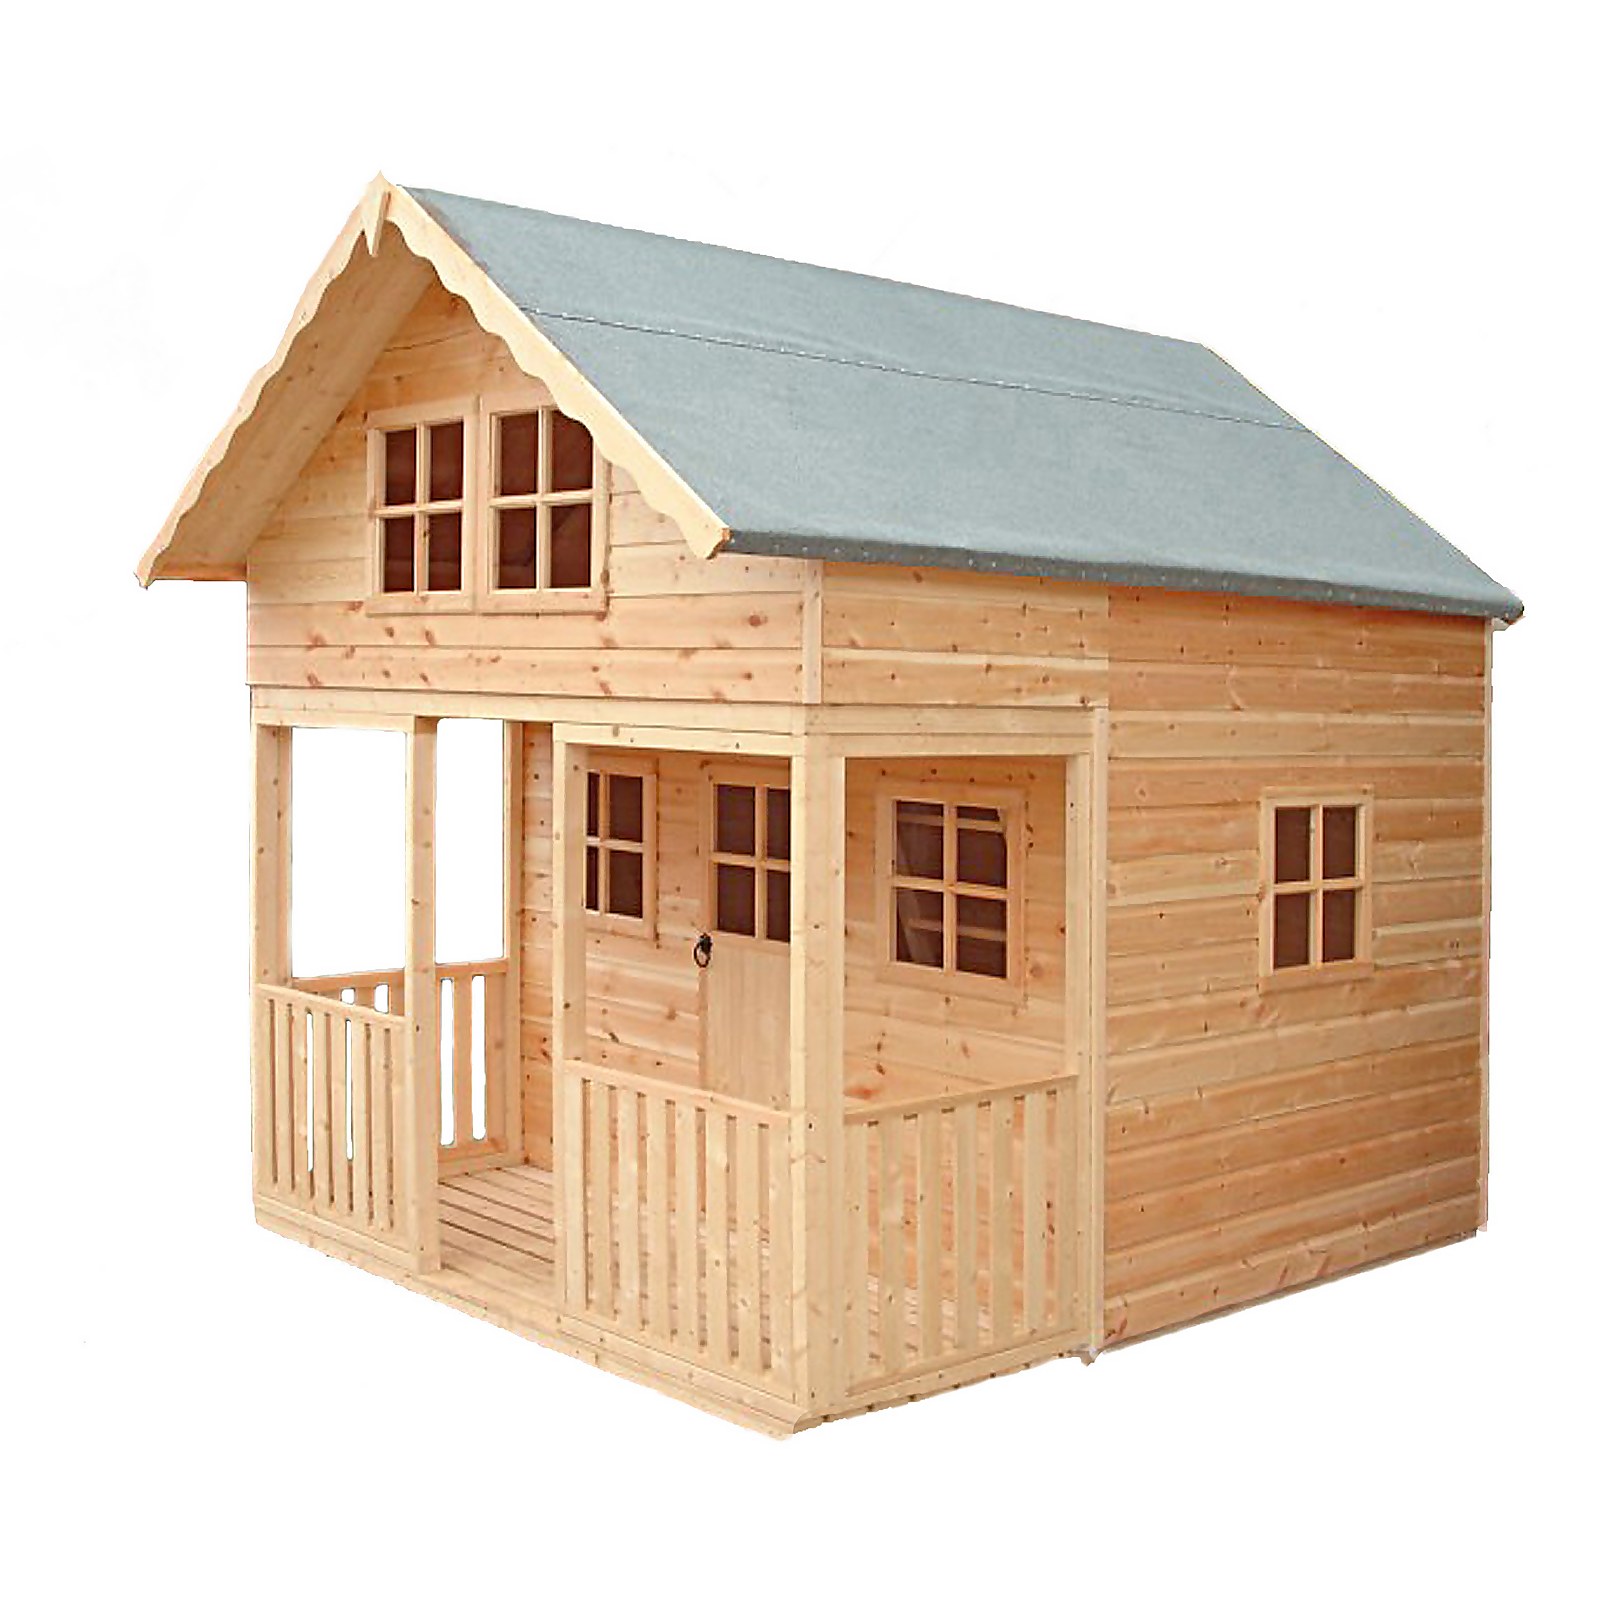 Shire 8 x 10ft Lodge Kids Wooden Playhouse